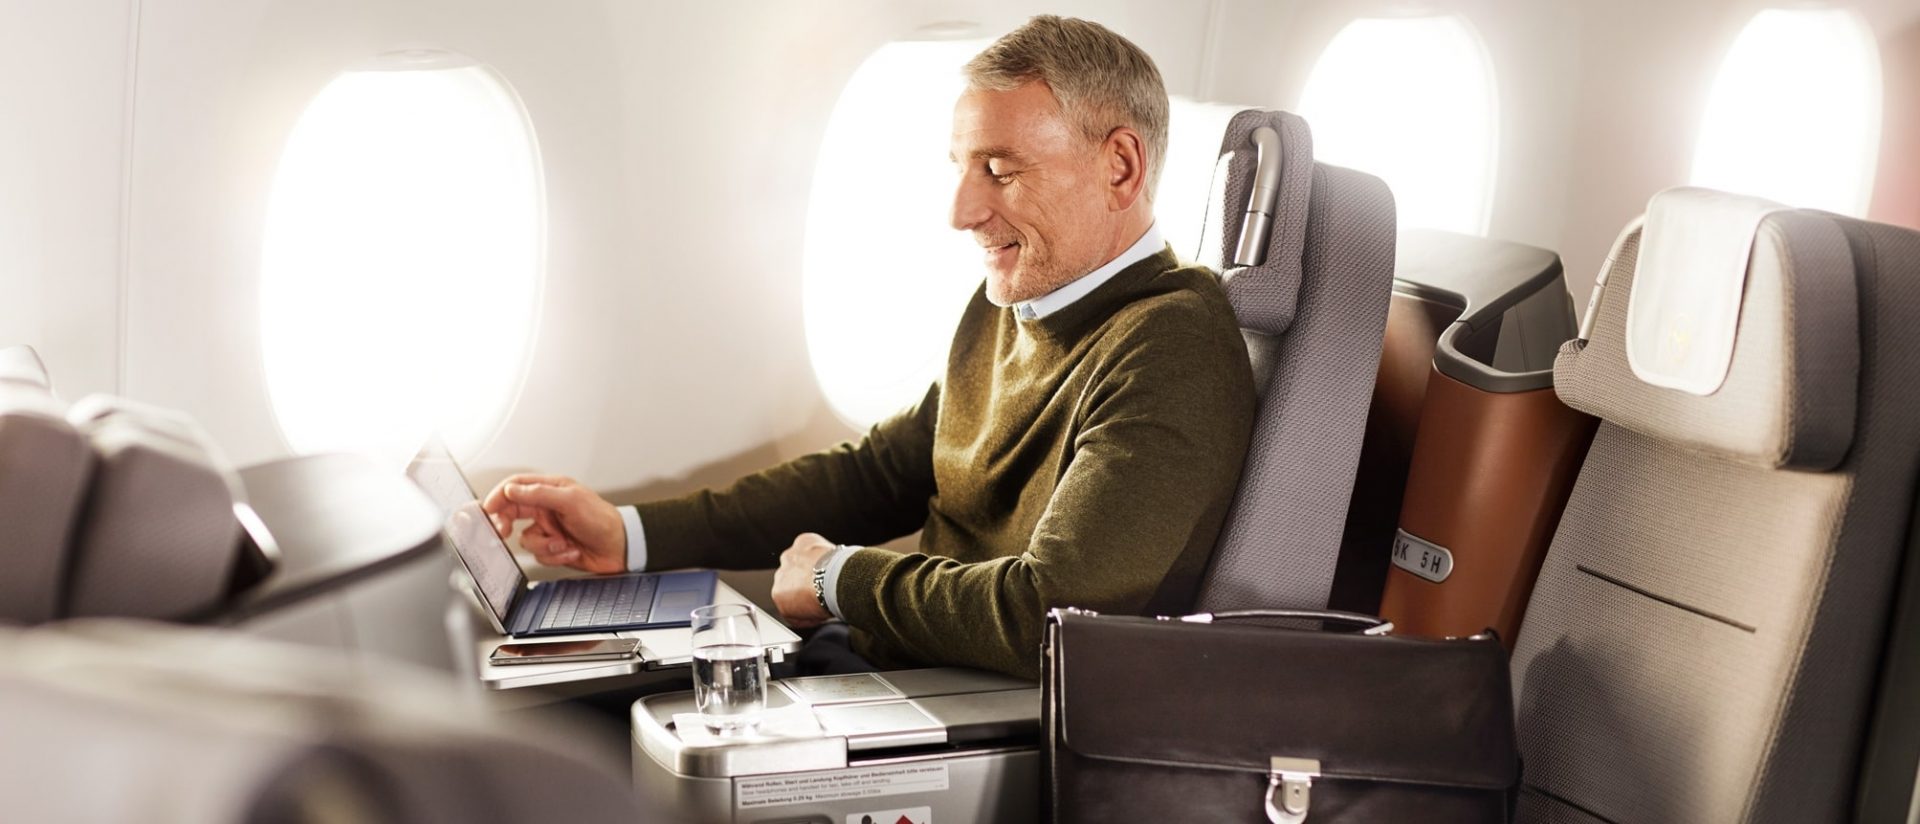 a man sitting in an airplane using a laptop